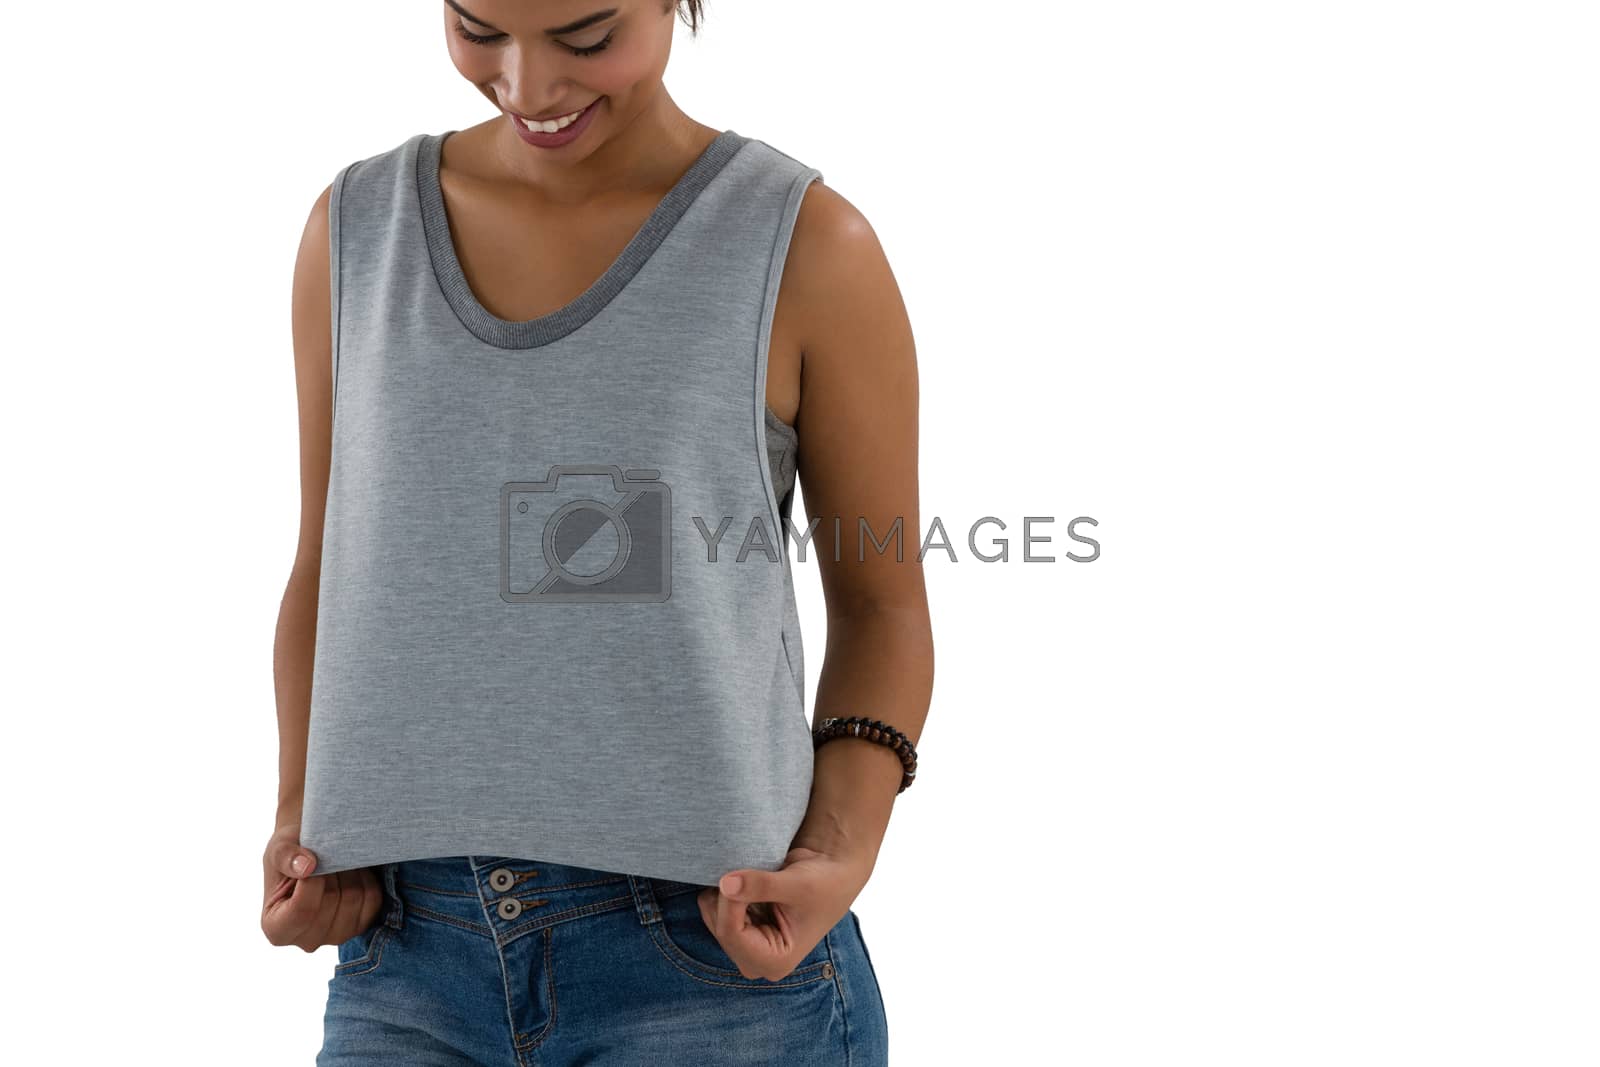 Royalty free image of Smiling young woman in casual clothing by Wavebreakmedia